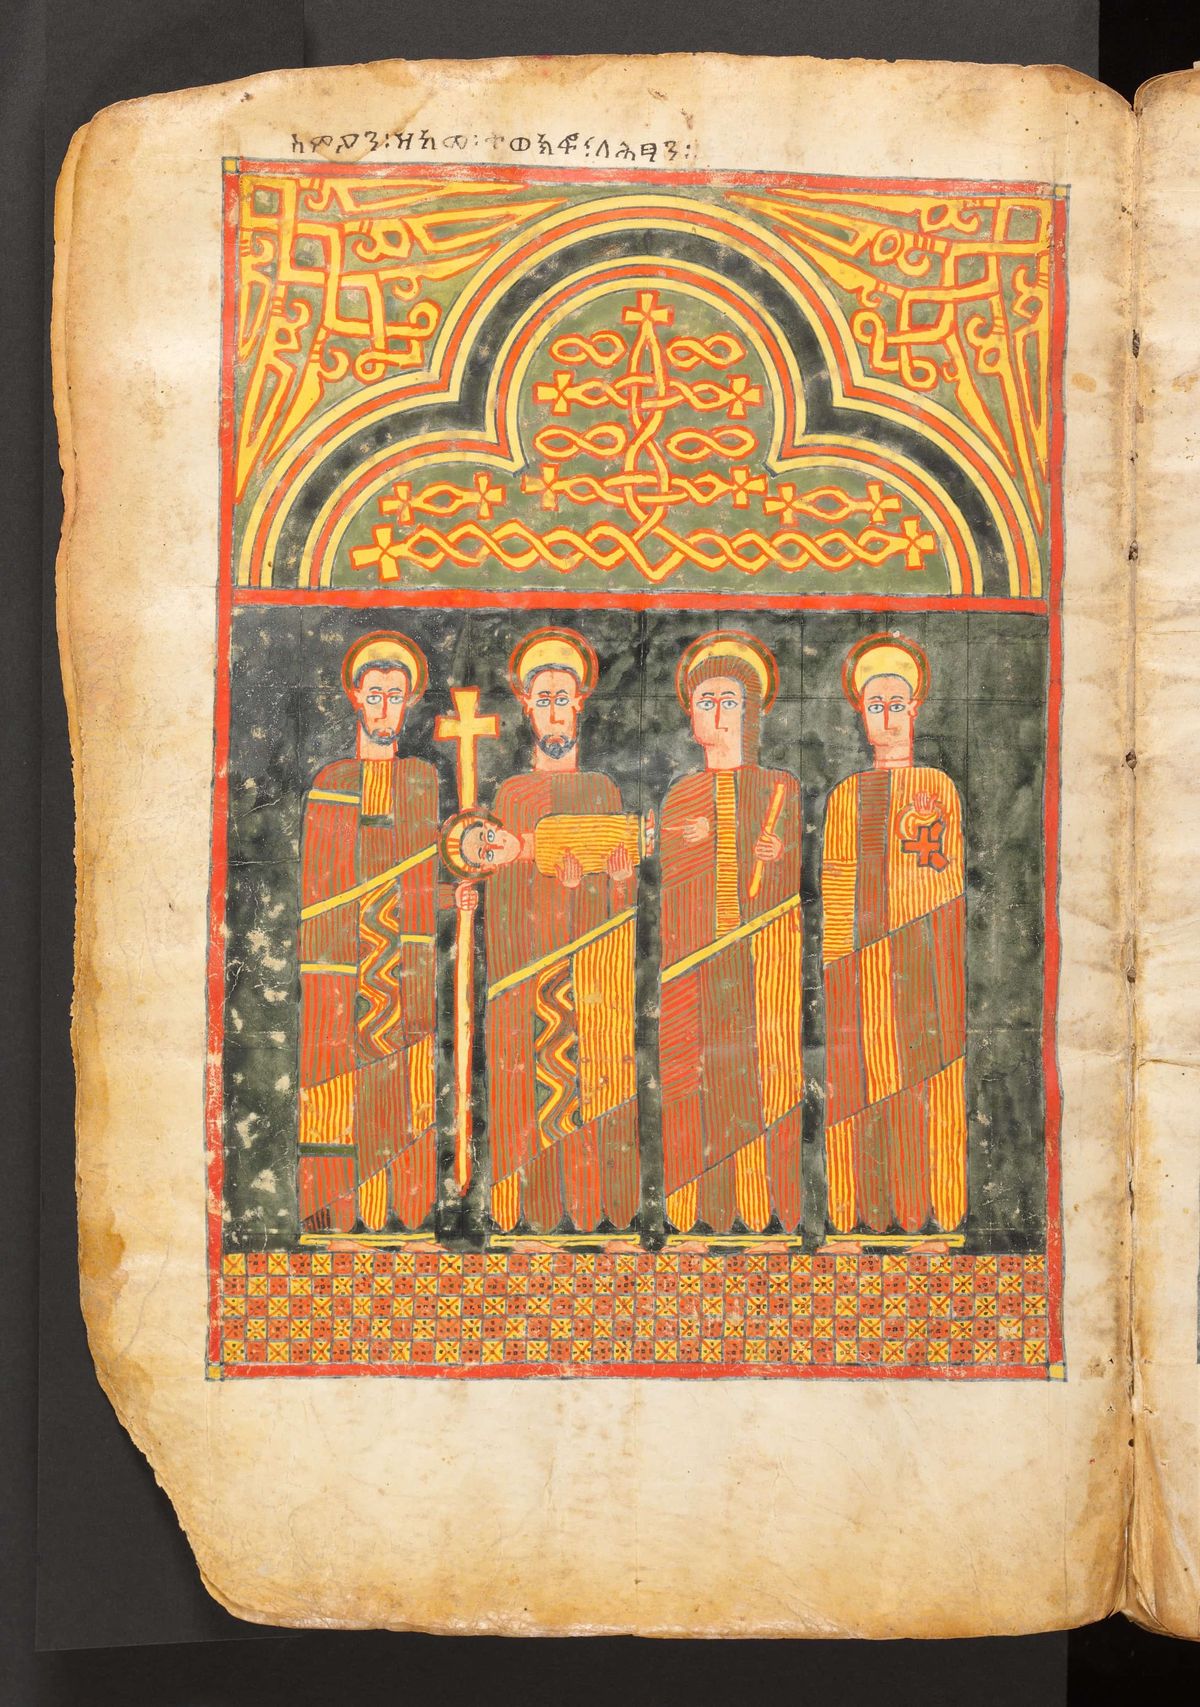 Presentation of Christ in the Temple Illuminated Gospel (14th–15th century) by the Amhara Peoples - Public Domain Ethiopian Orthodox Painting